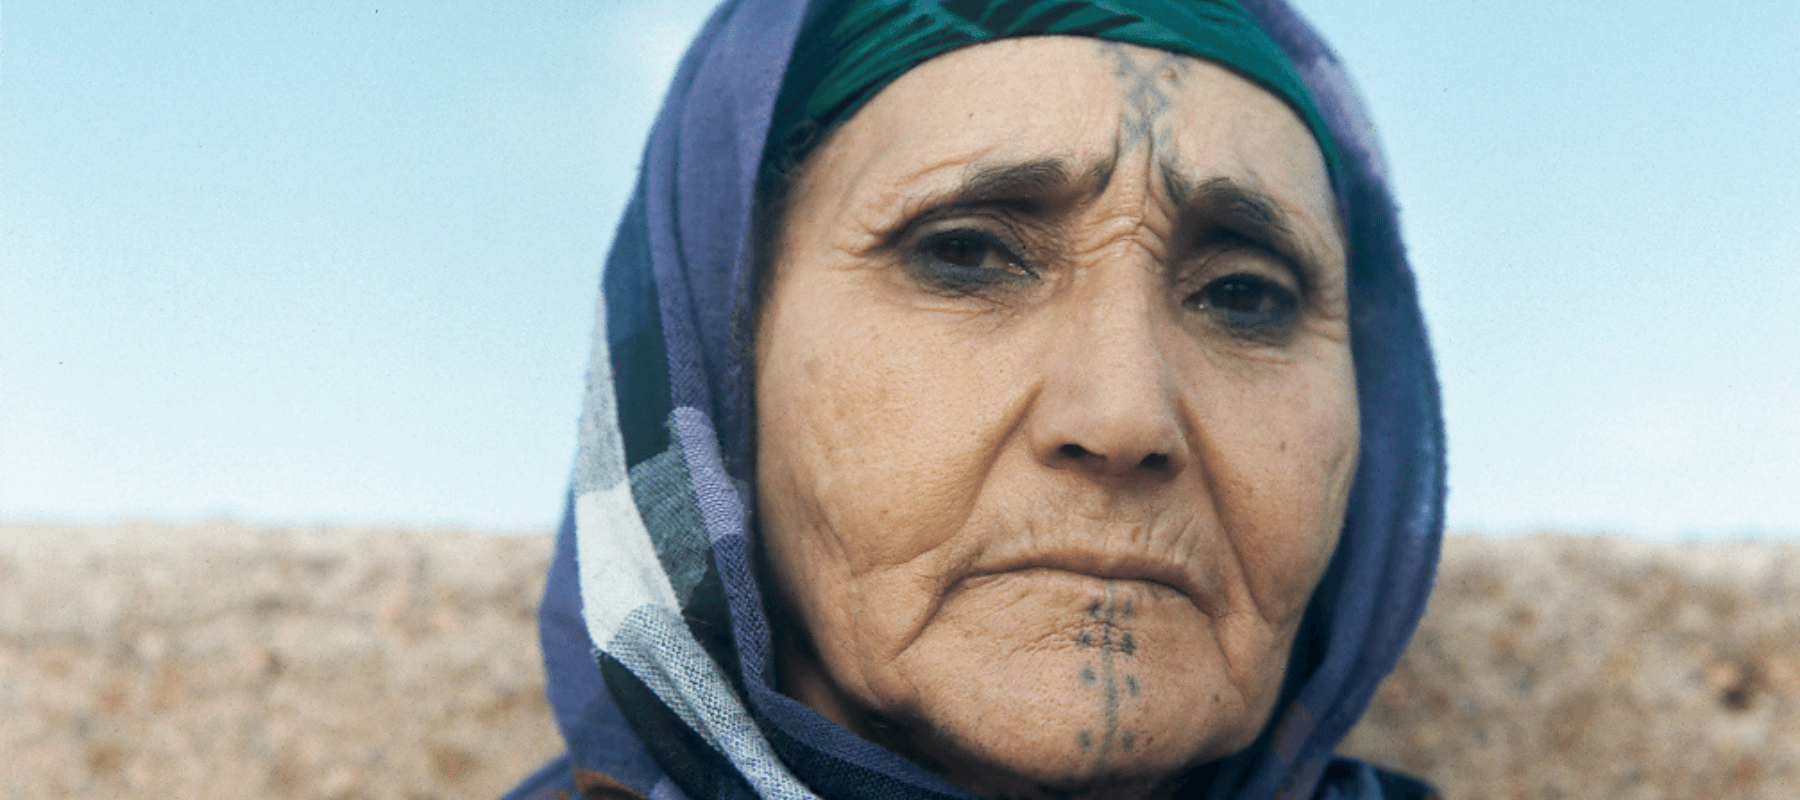 Berber Woman with Kohl eyeliner and face tattoos